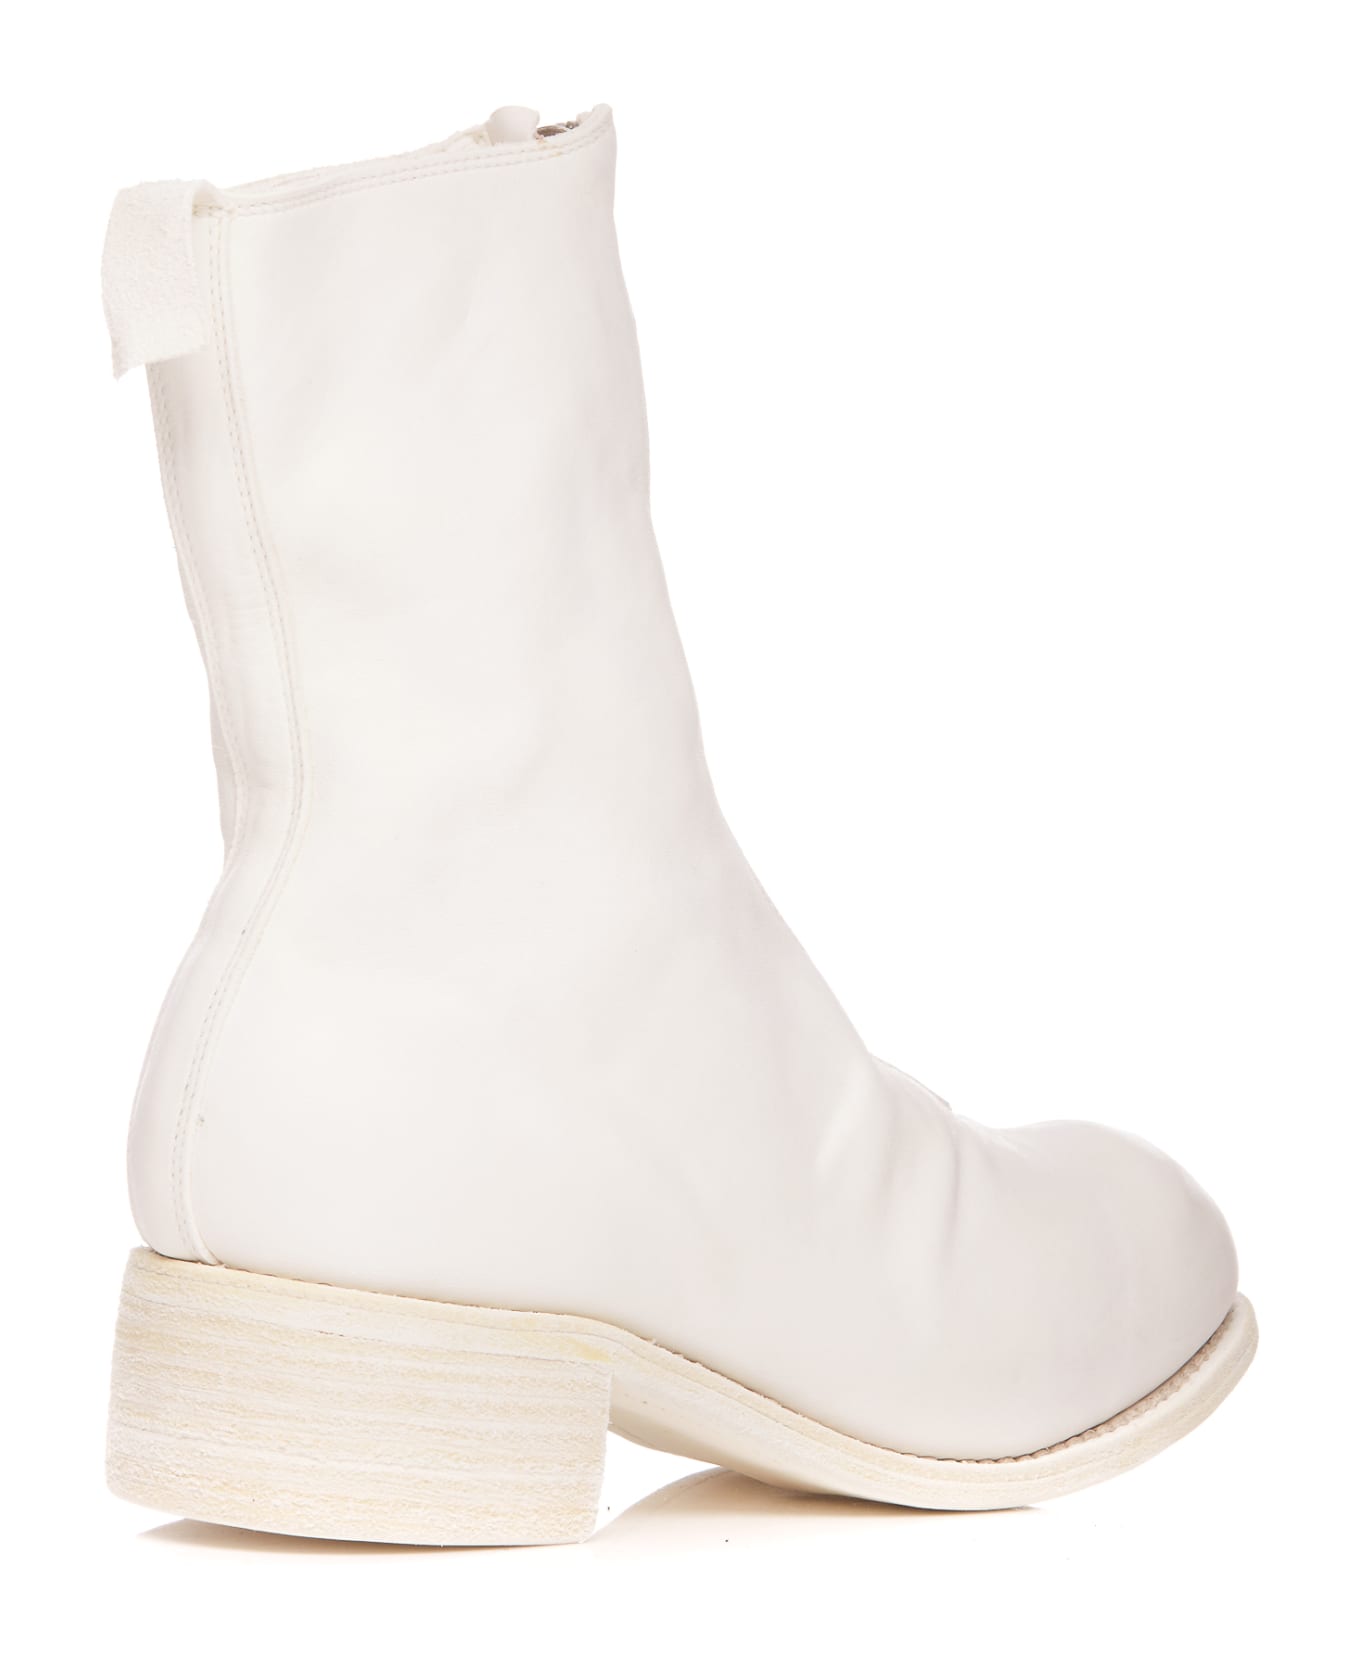 Guidi Pl2 Ankle Boots - White